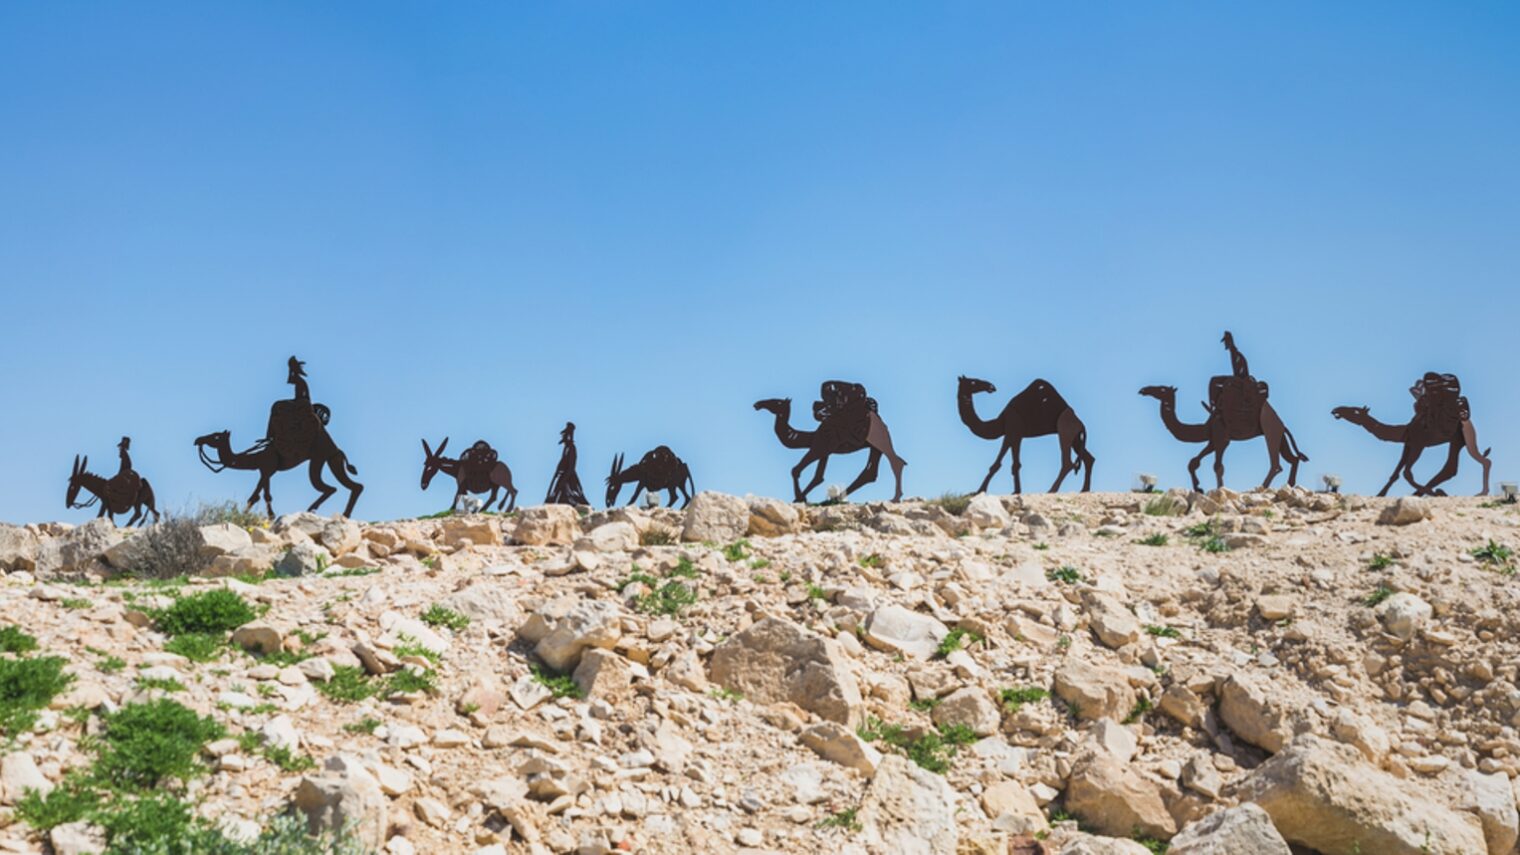 Sculpture of camels traversing the Incense Route in Avdat National Park, Israel. Photo by Kate Giryes/Shutterstock.com